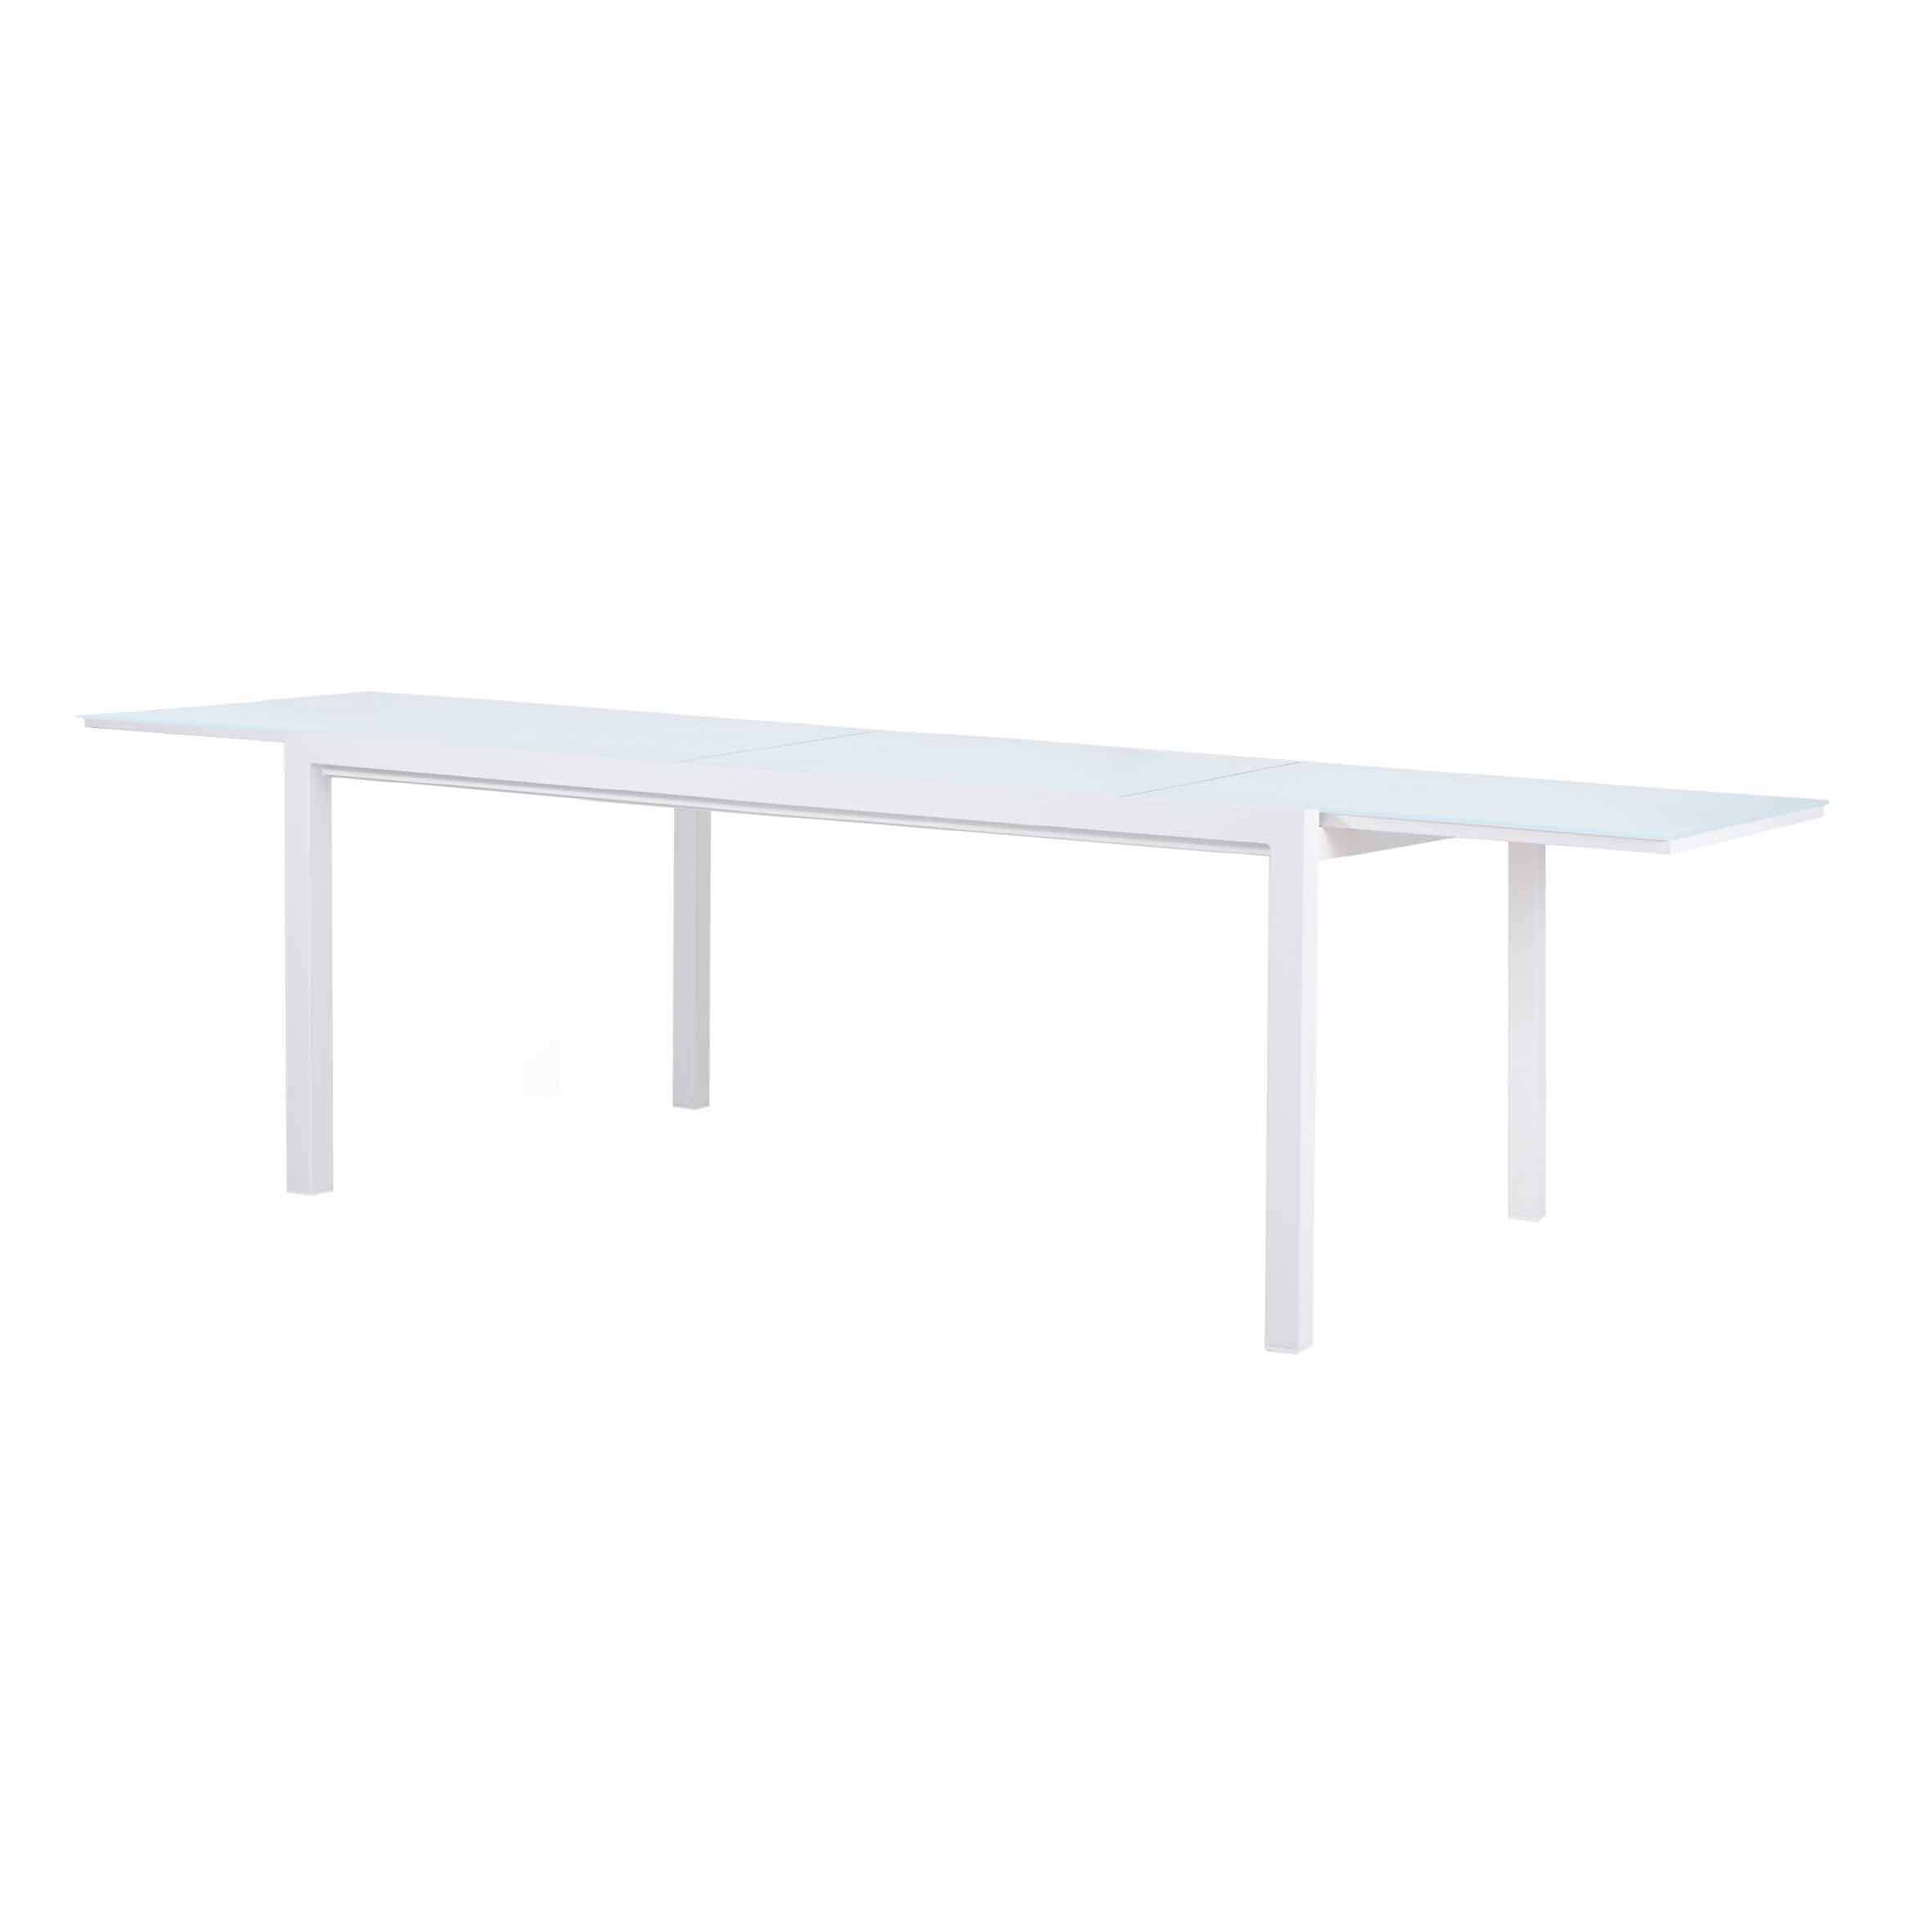 Kotka extension table S9